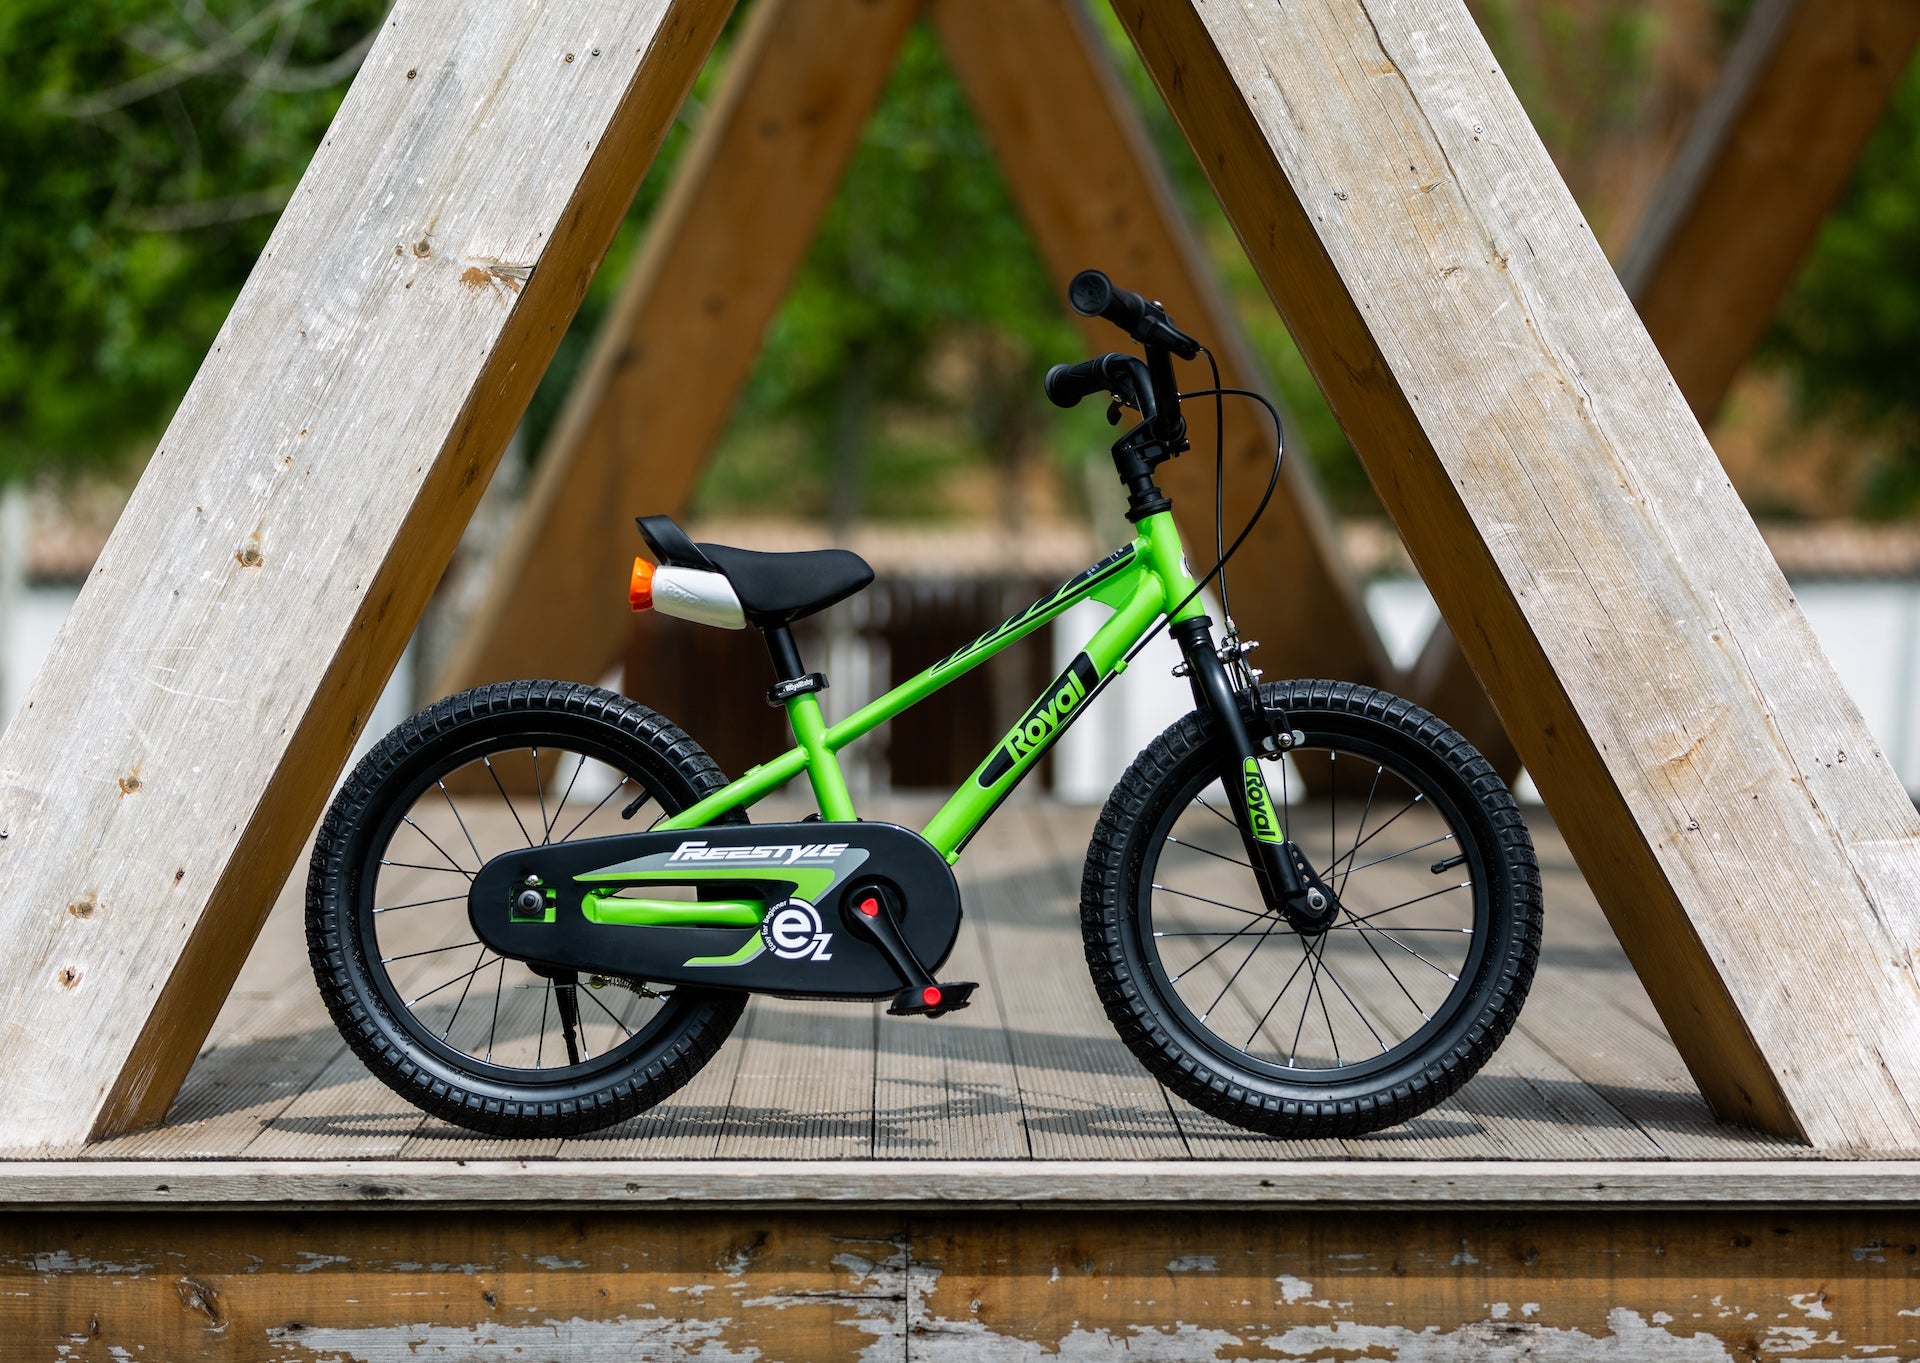 THE EZ BIKE & WHY IT IS A GAME CHANGER